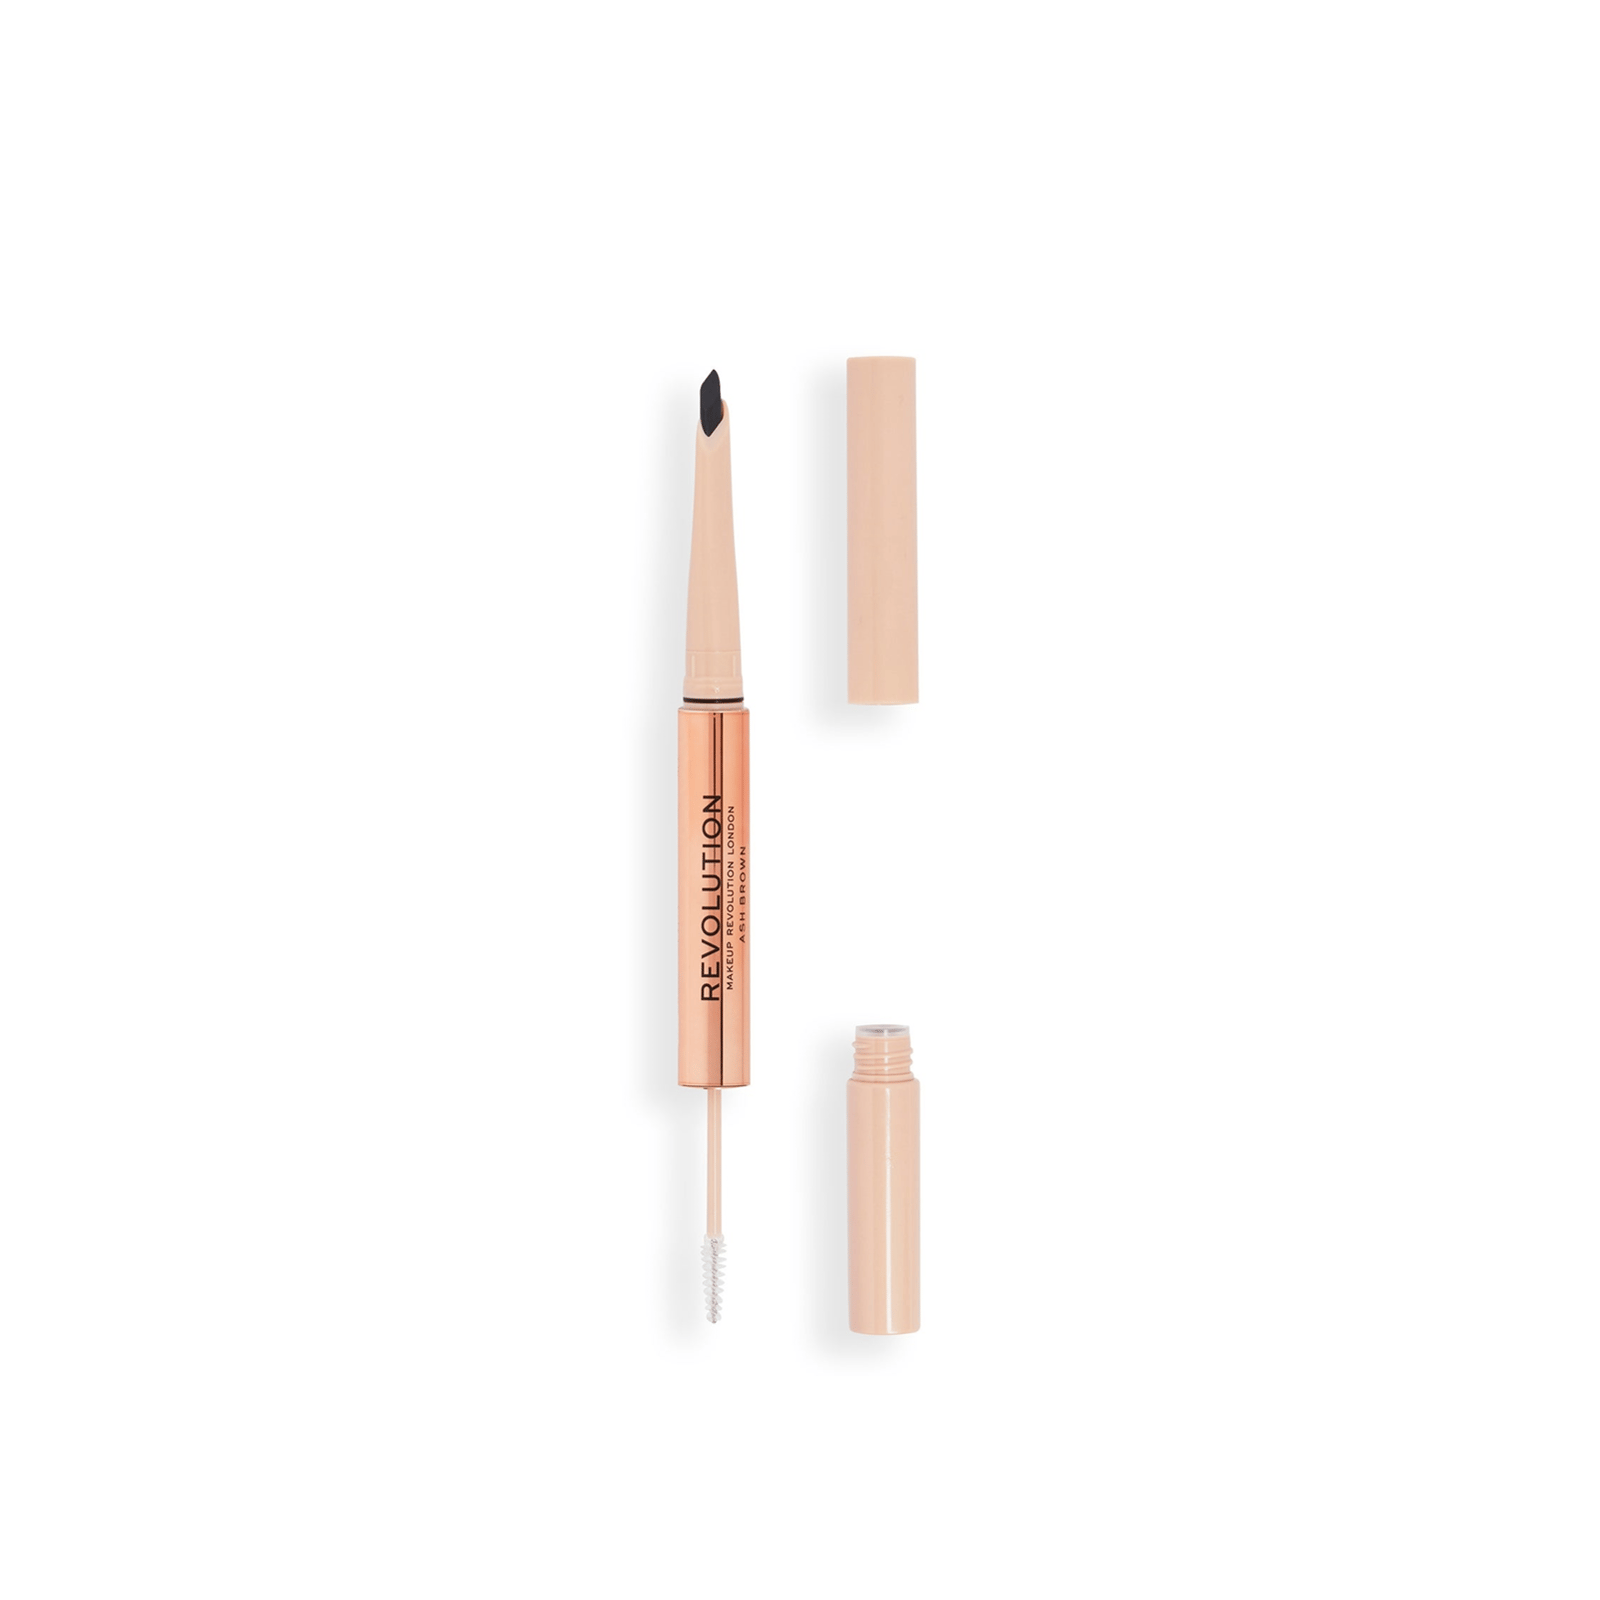 Makeup Revolution Fluffy Brow Duo Ash Brown